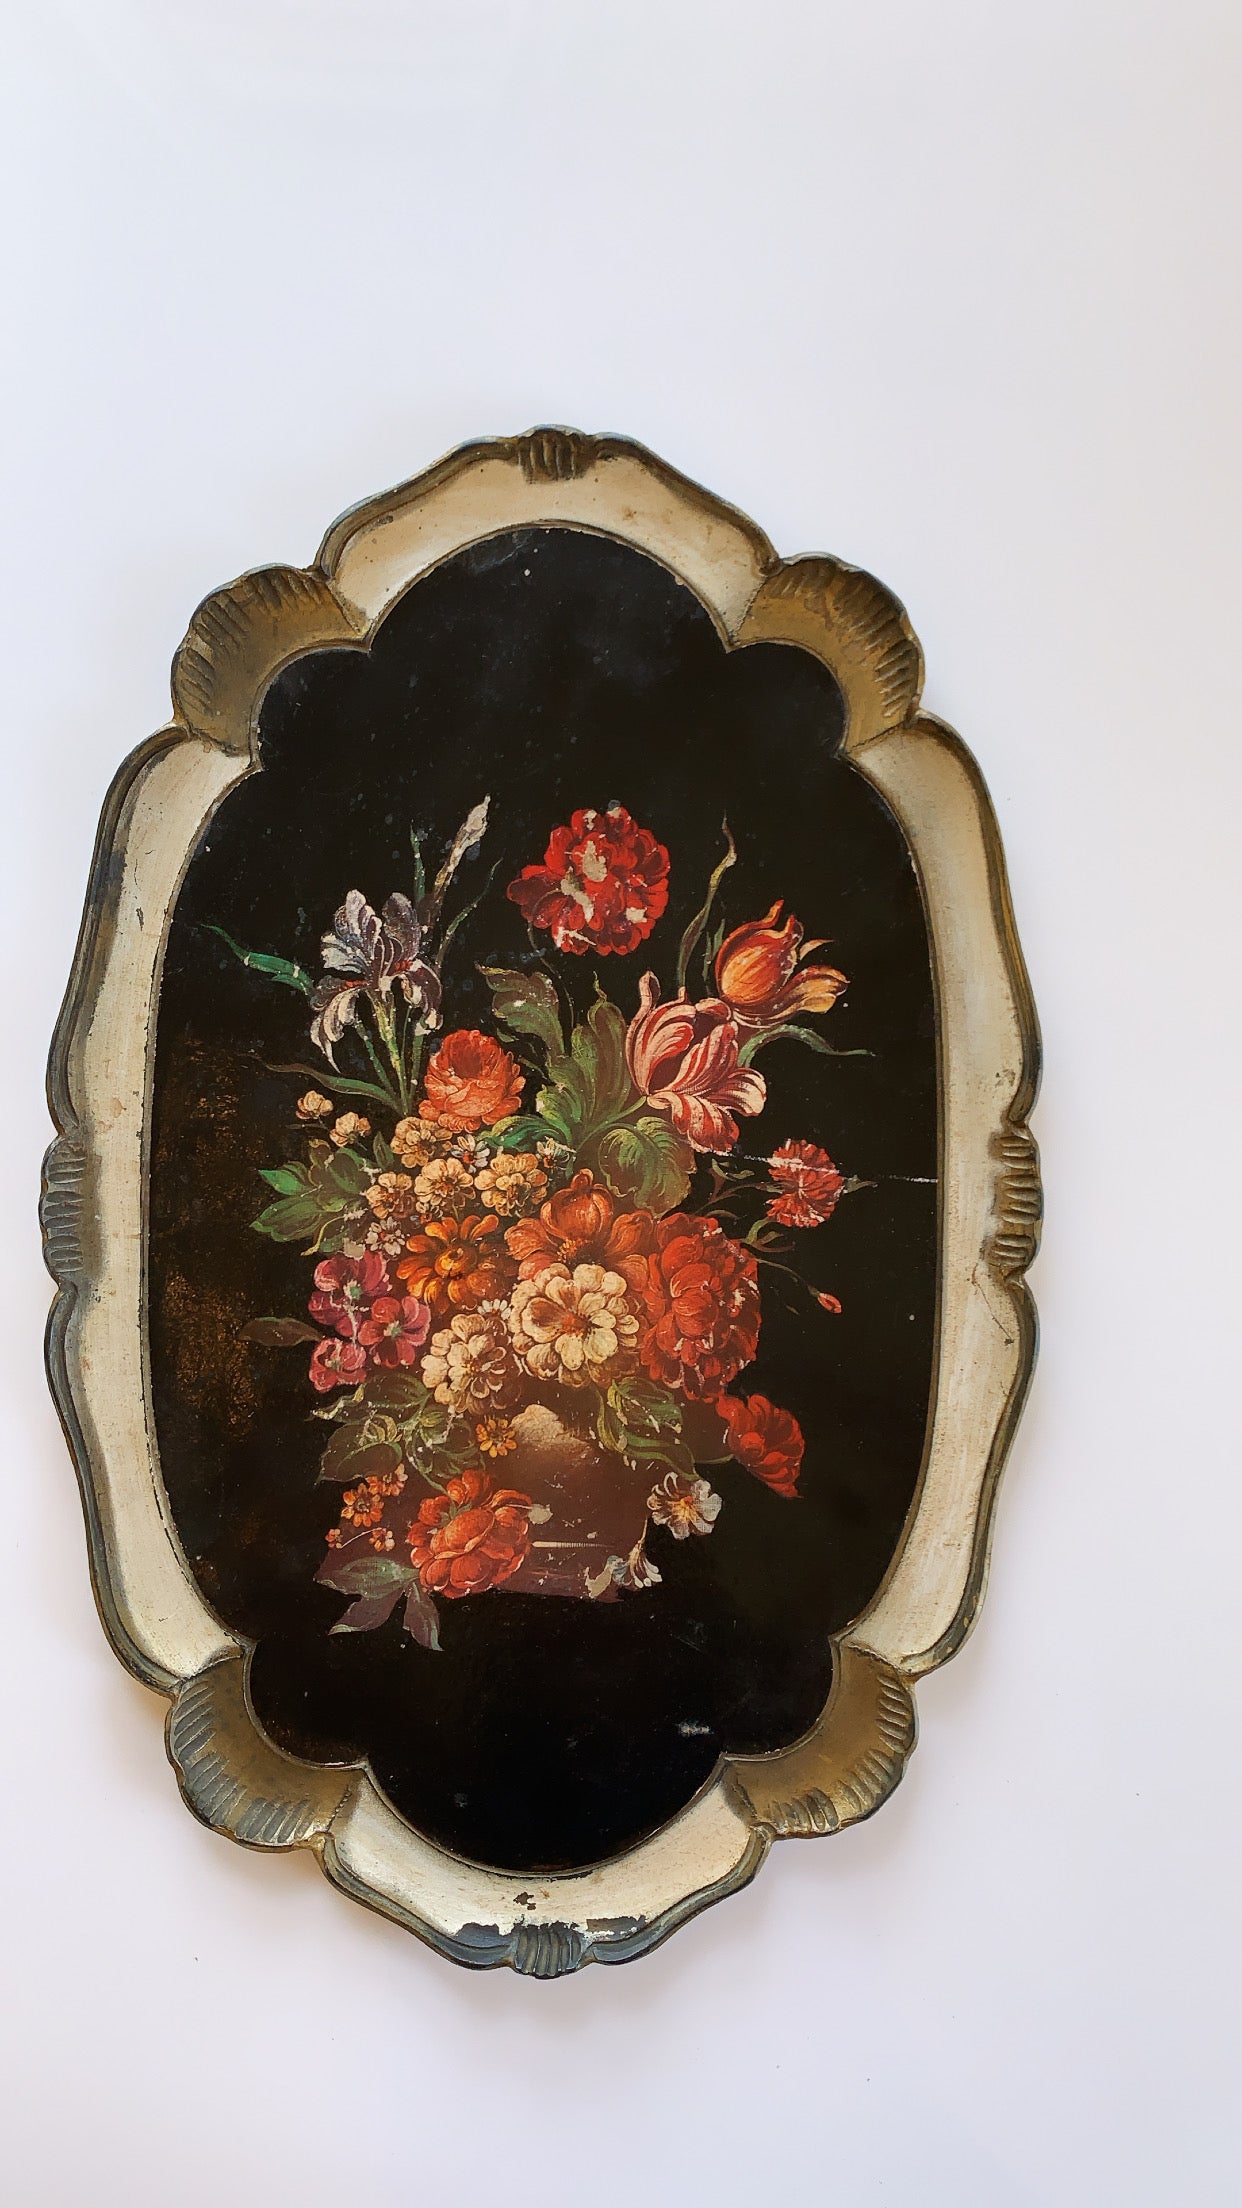 Vintage Florentine Tray in Cream and Black with Floral Still Life